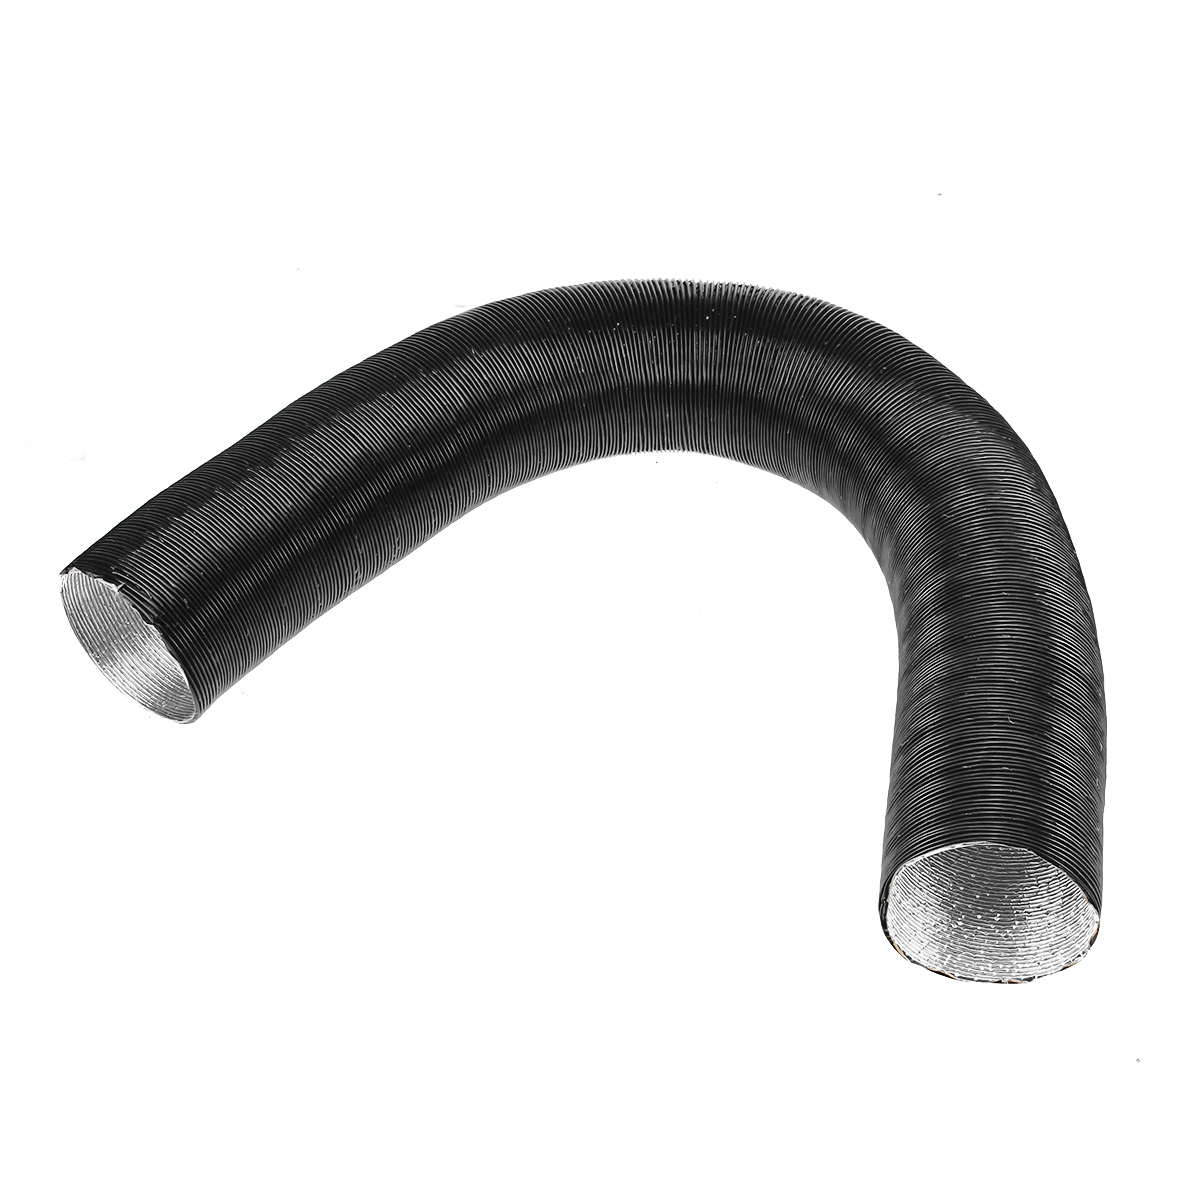 60mm-Heater-Pipe-Ducting-T-Piece-Warm-Air-Outlet-Vent-Hose-Clips-For-Parking-Diesel-Heater-1465123-5